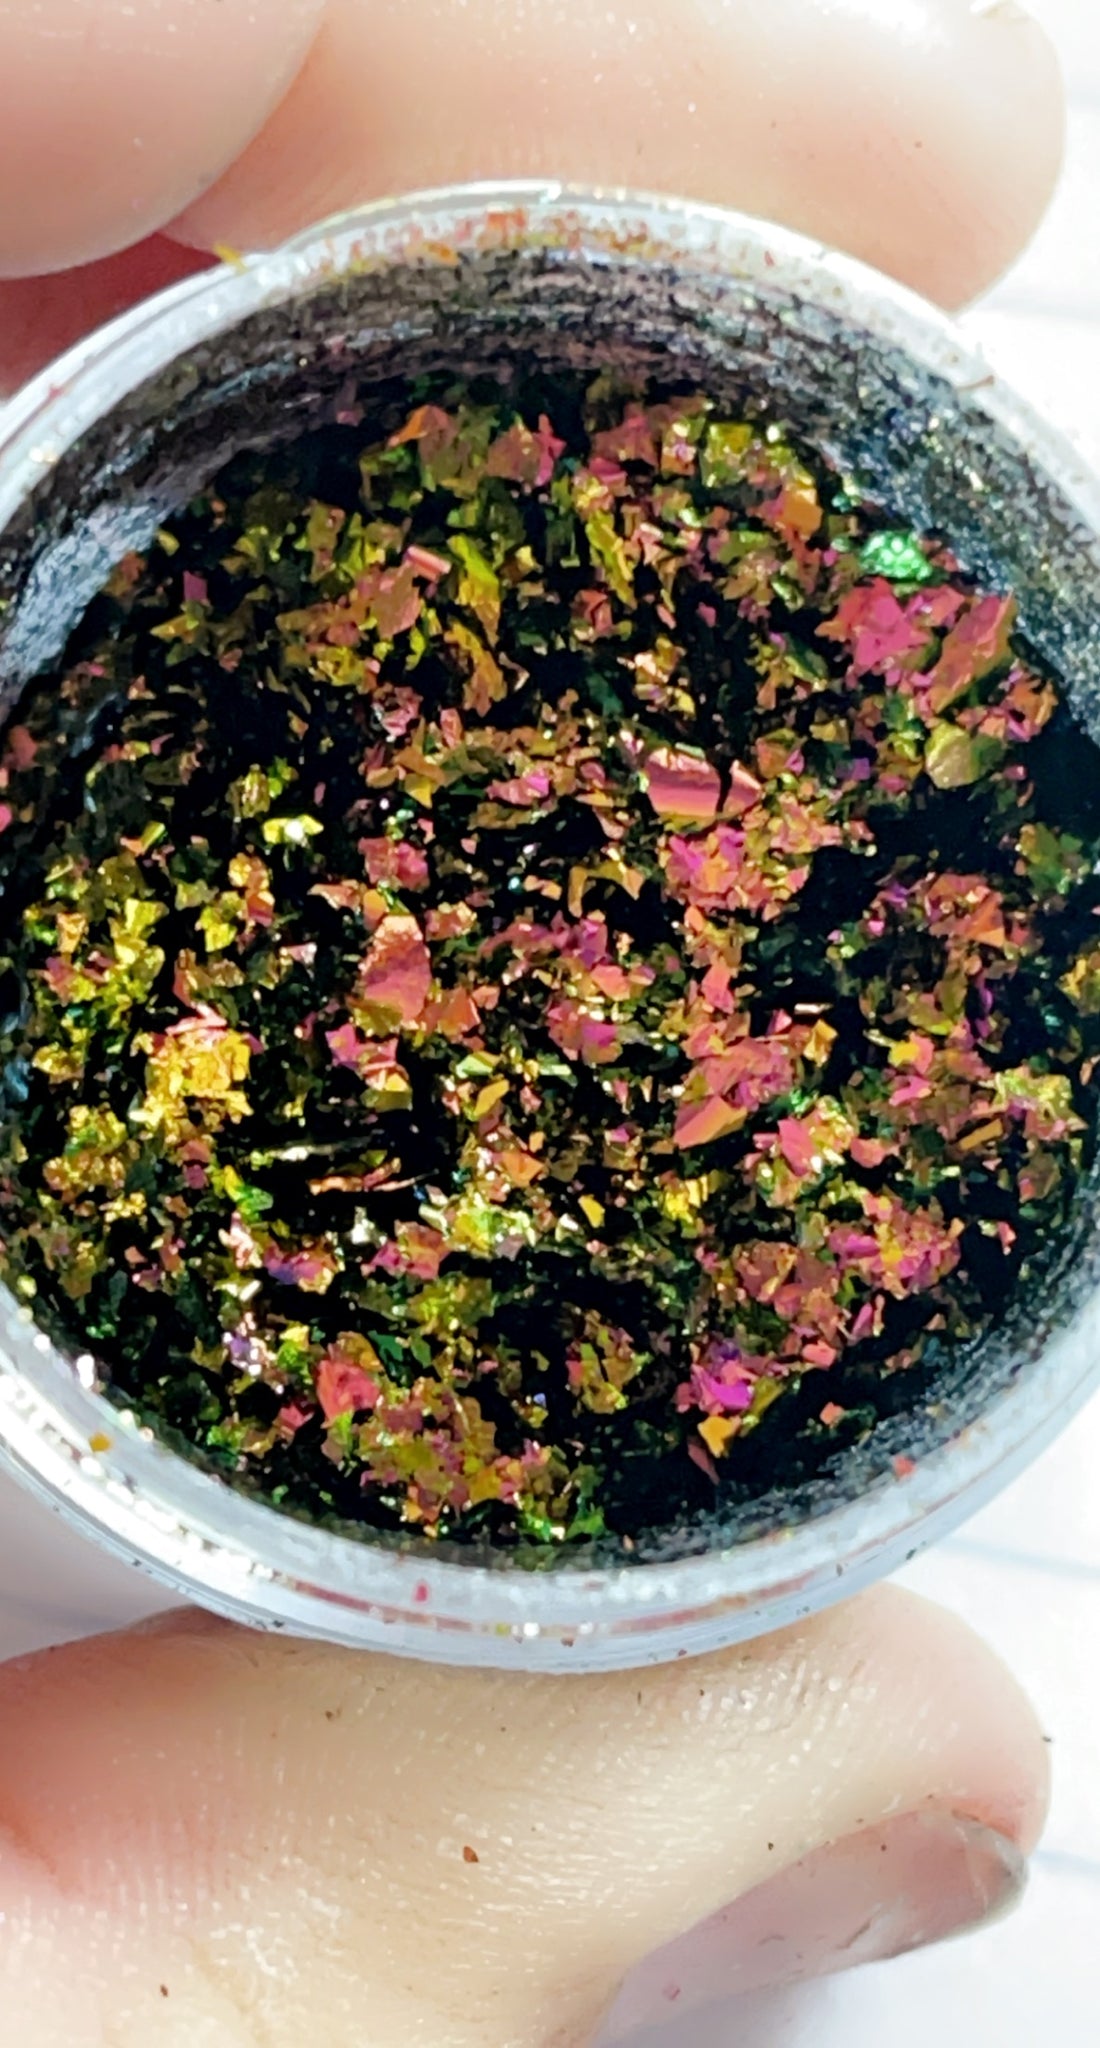 Chameleon Mica Flakes - Magenta to Copper to Olive